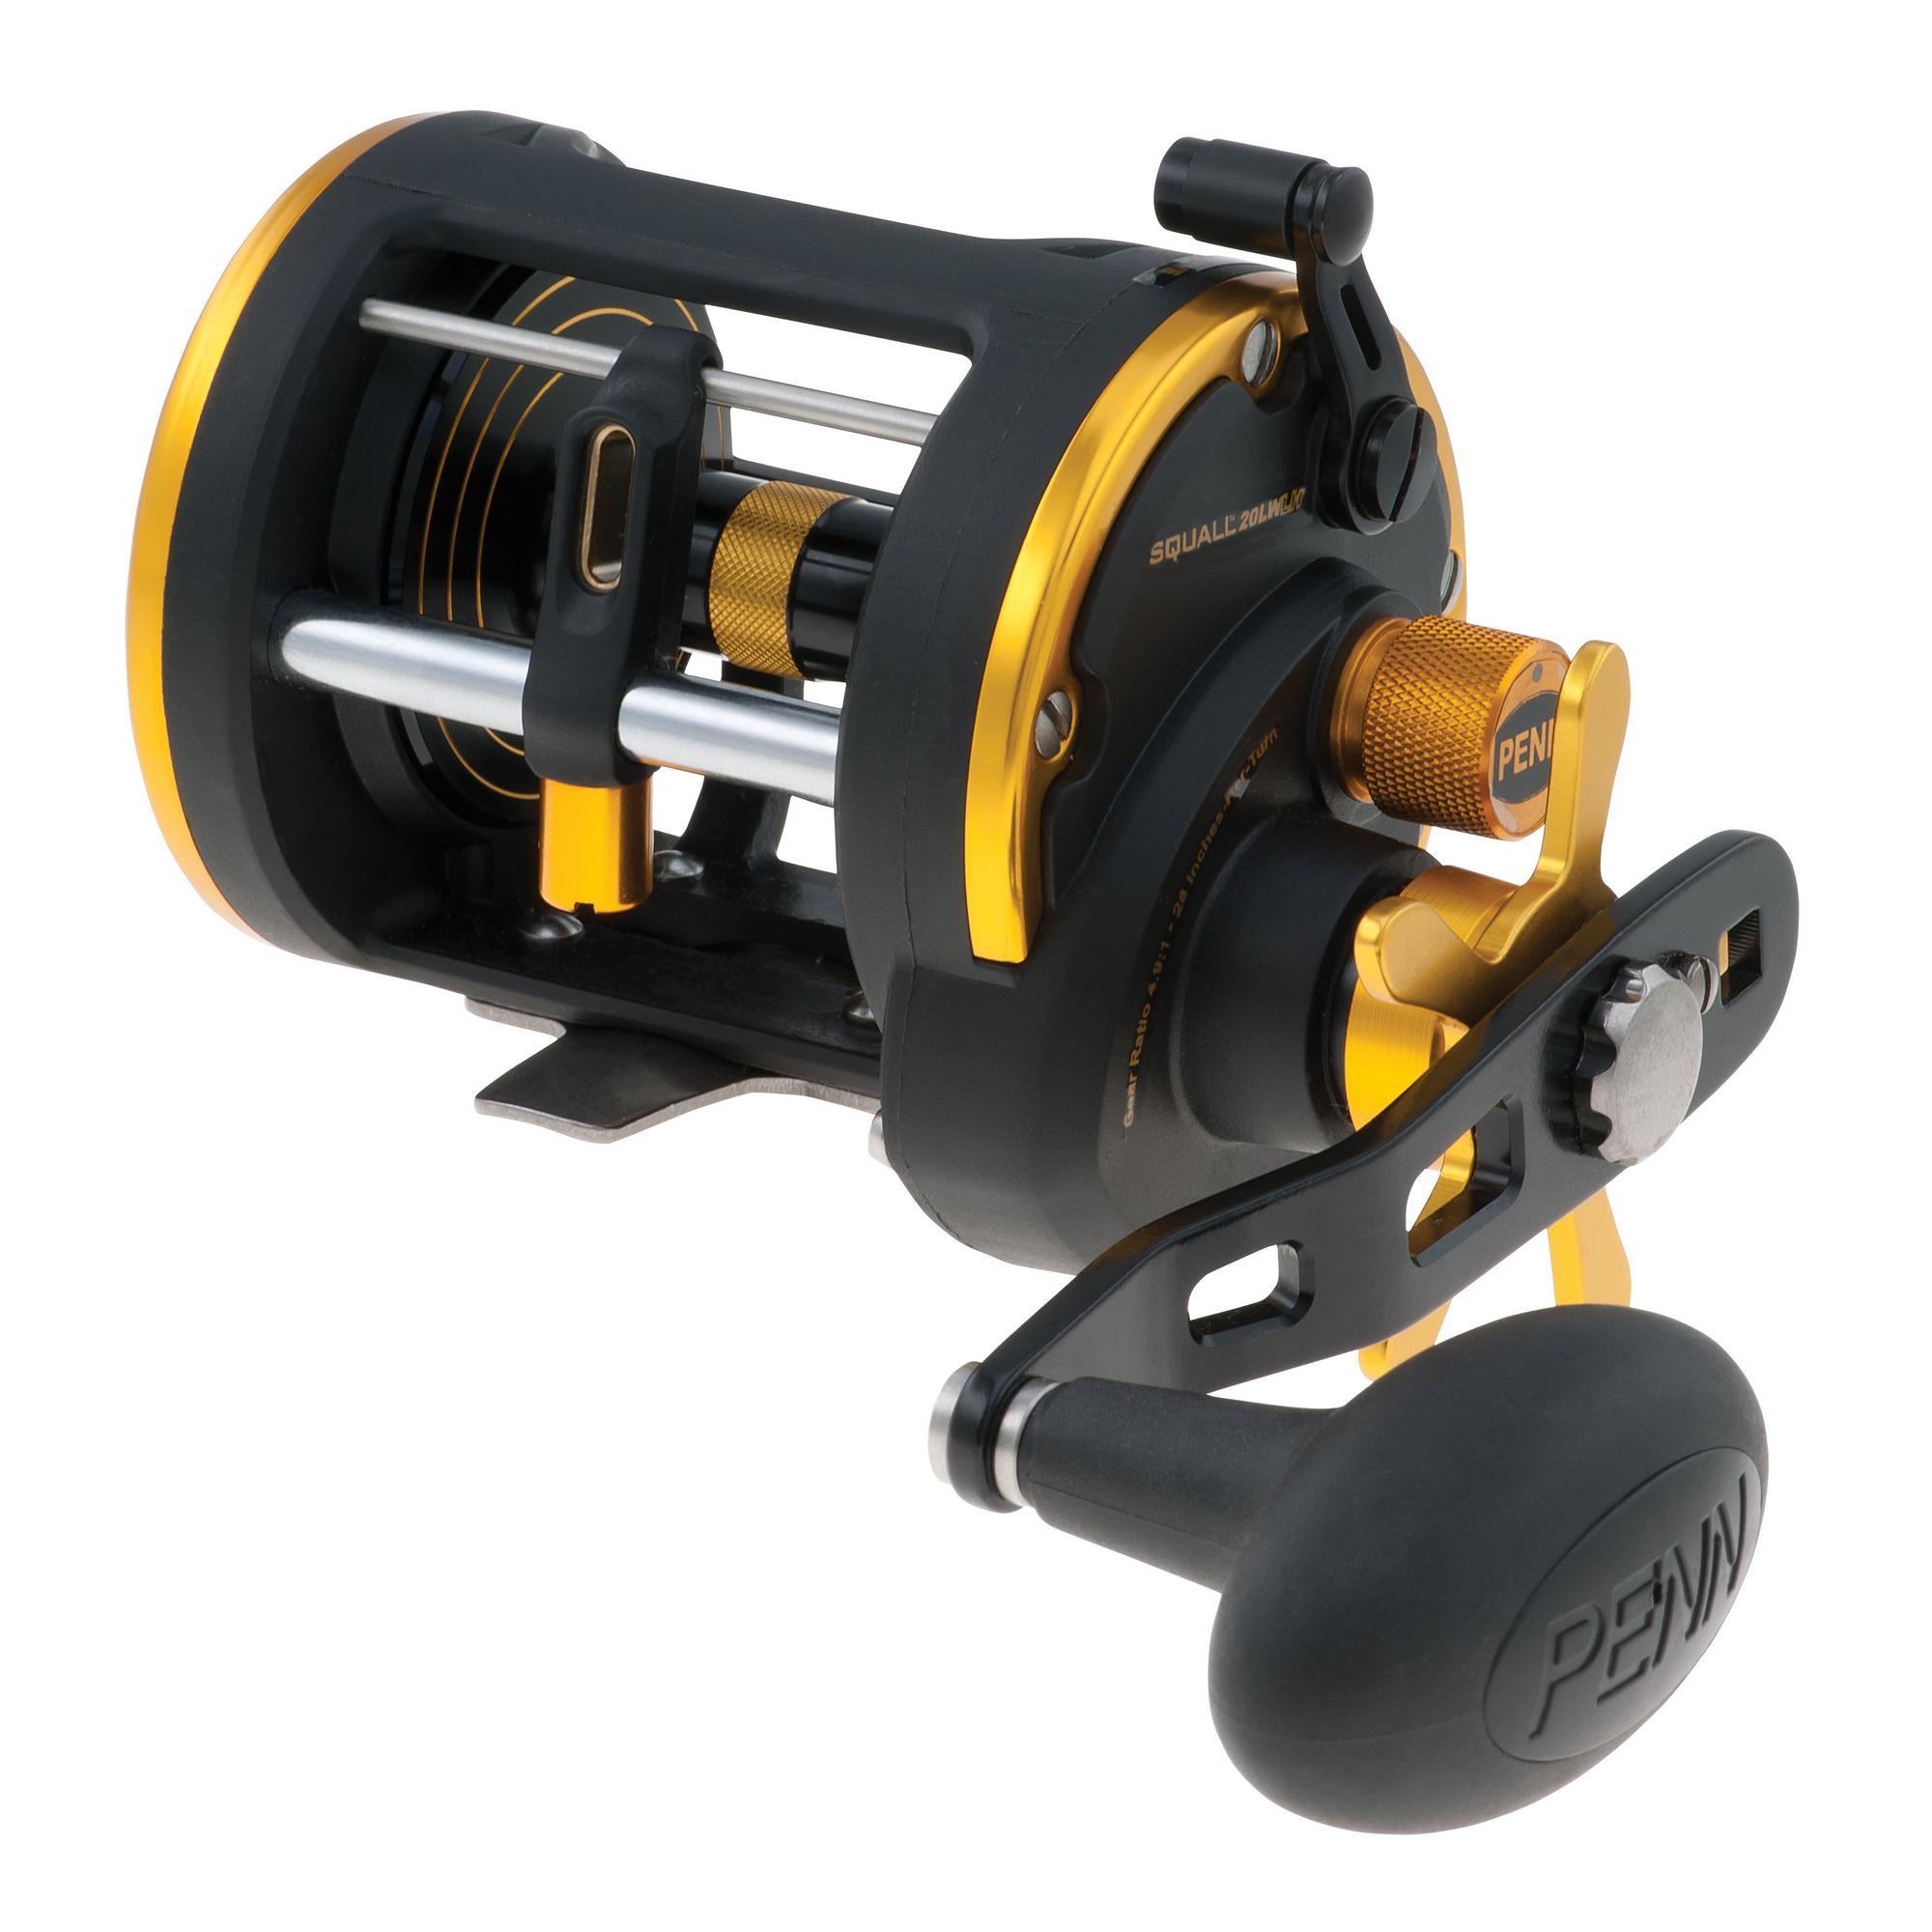 Penn Squall 20 LW Left Hand Levelwind Reel - Buy from NZ owned